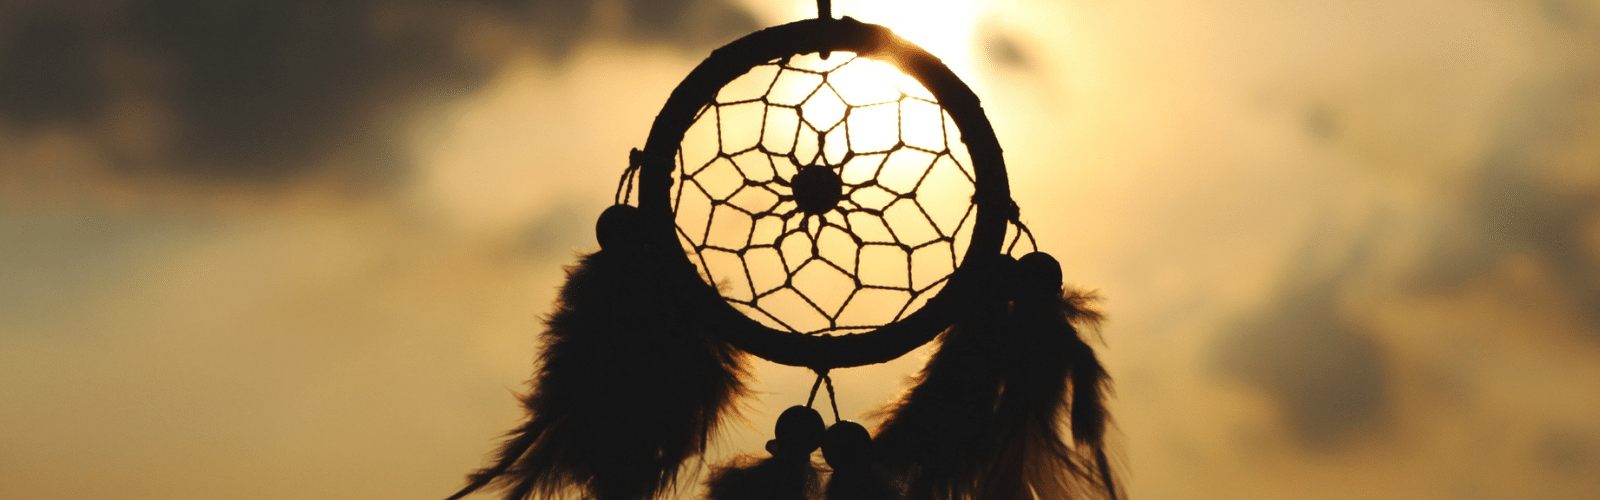 How to make a dream catcher: 4 easy DIY's to make with kids